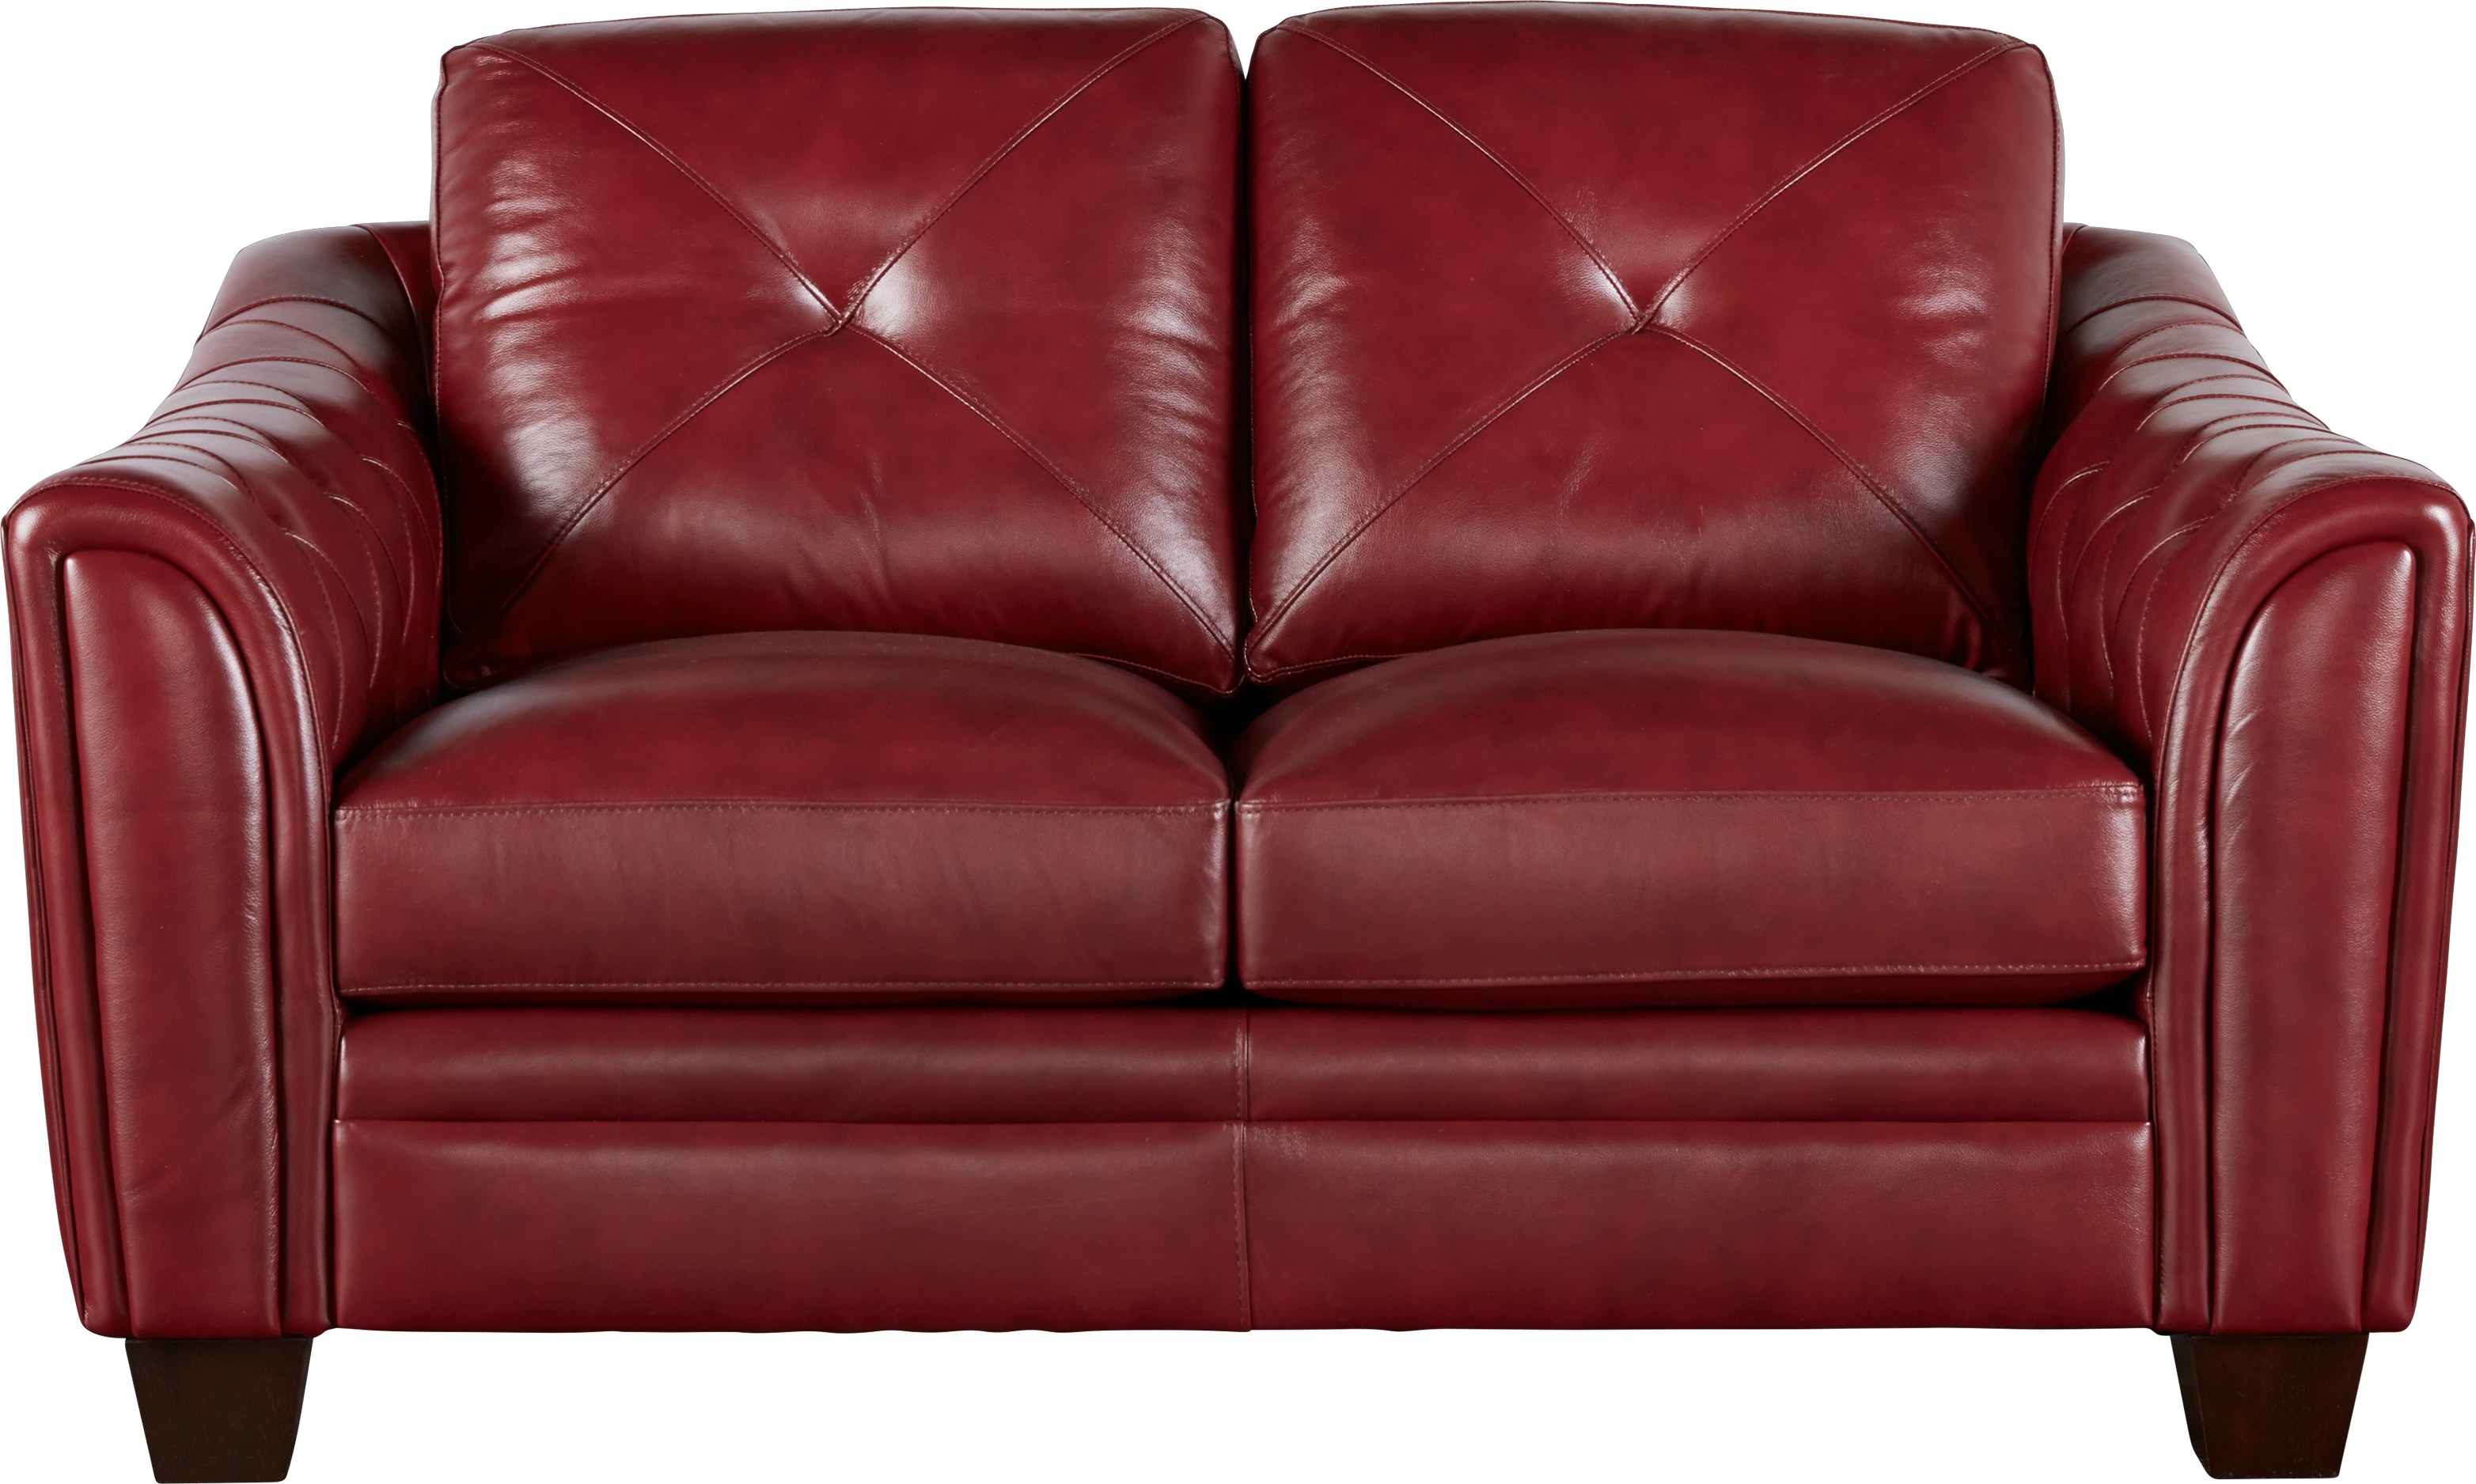 Cindy Crawford Home Marcella Red Leather Loveseat - Leather Loveseats (Red)